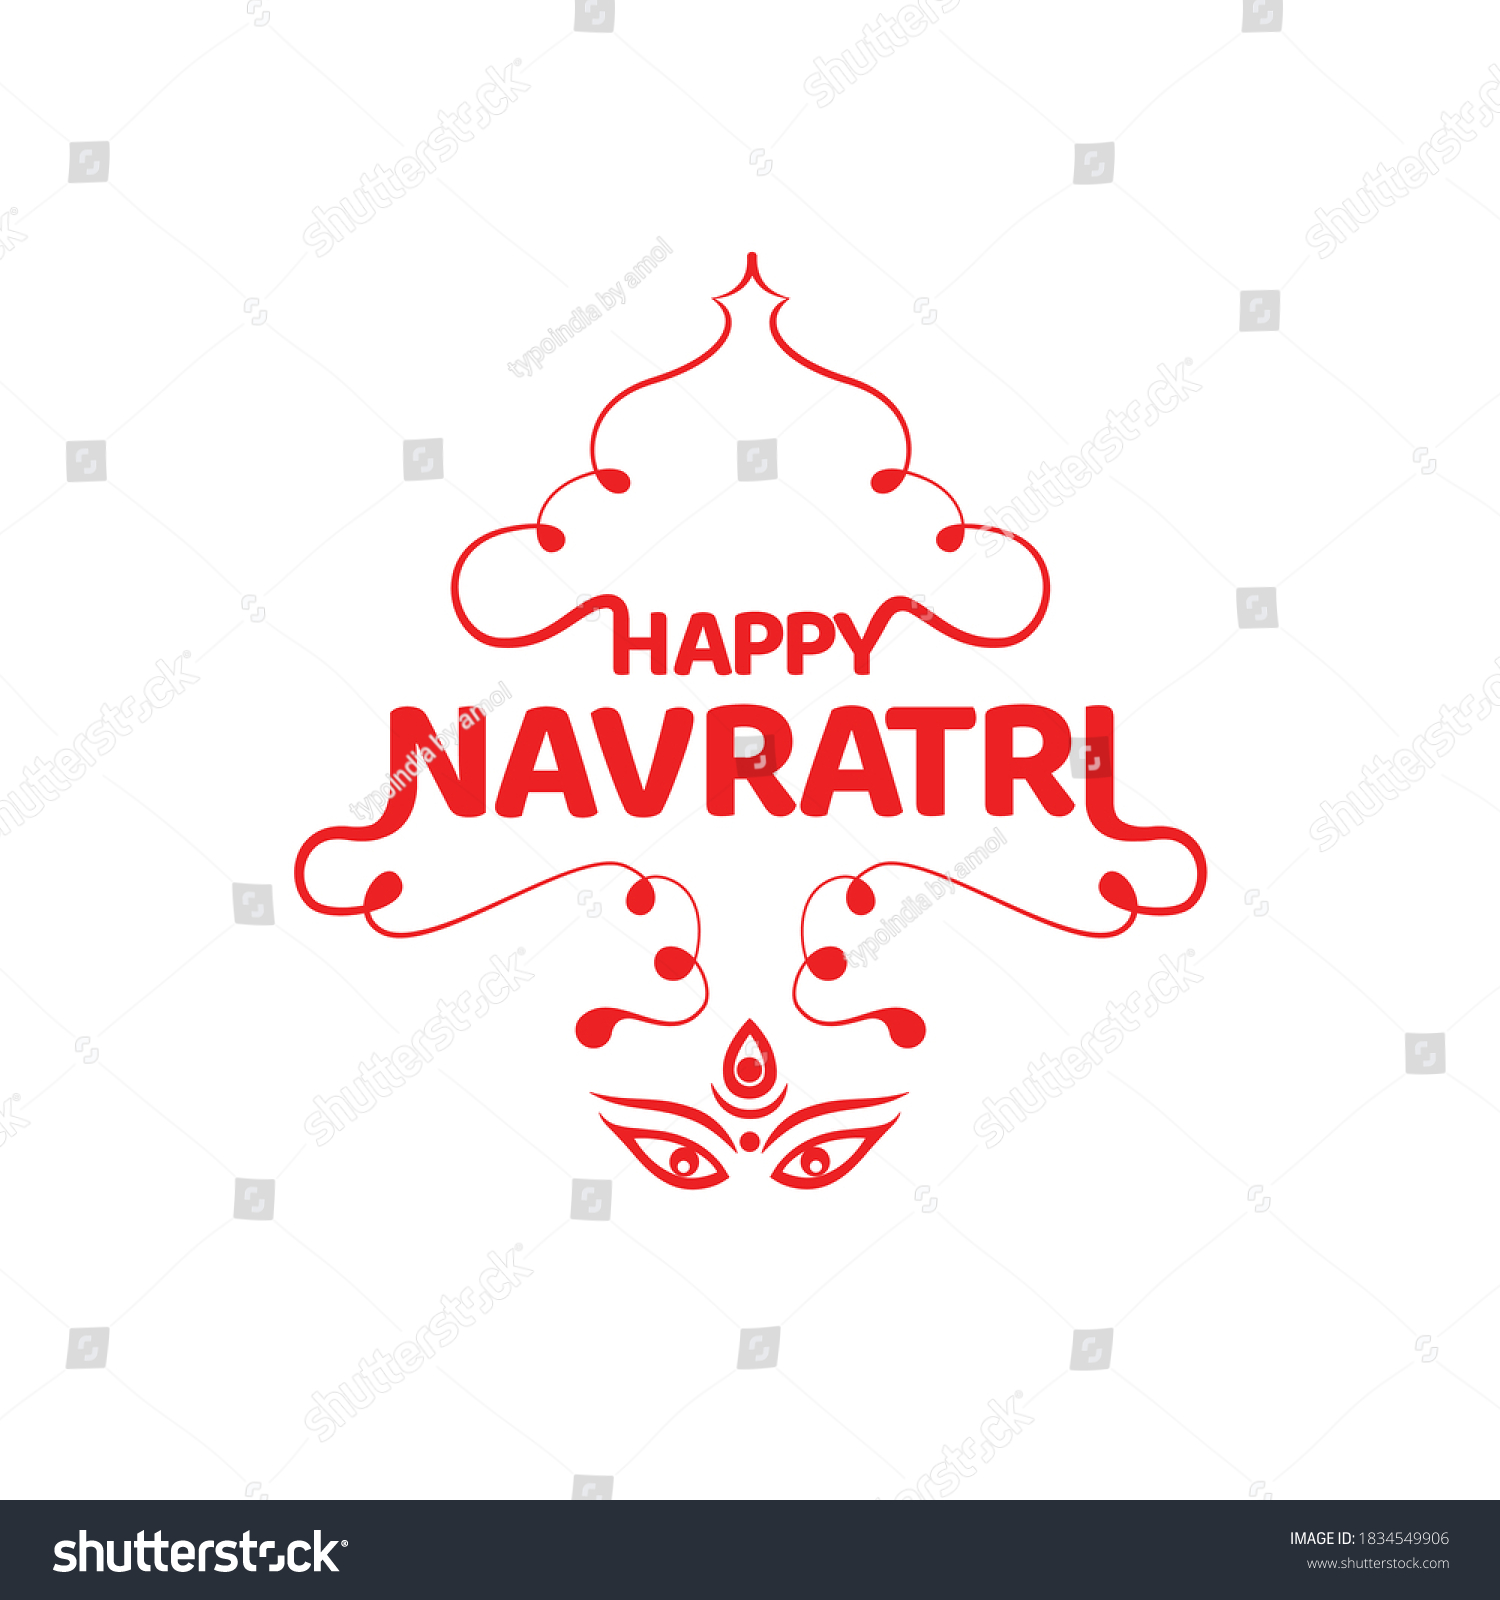 SVG of Happy Navratri in decorative form with lord Durga eyes.  Nine days festival of lord Durga it means Navratri.  svg